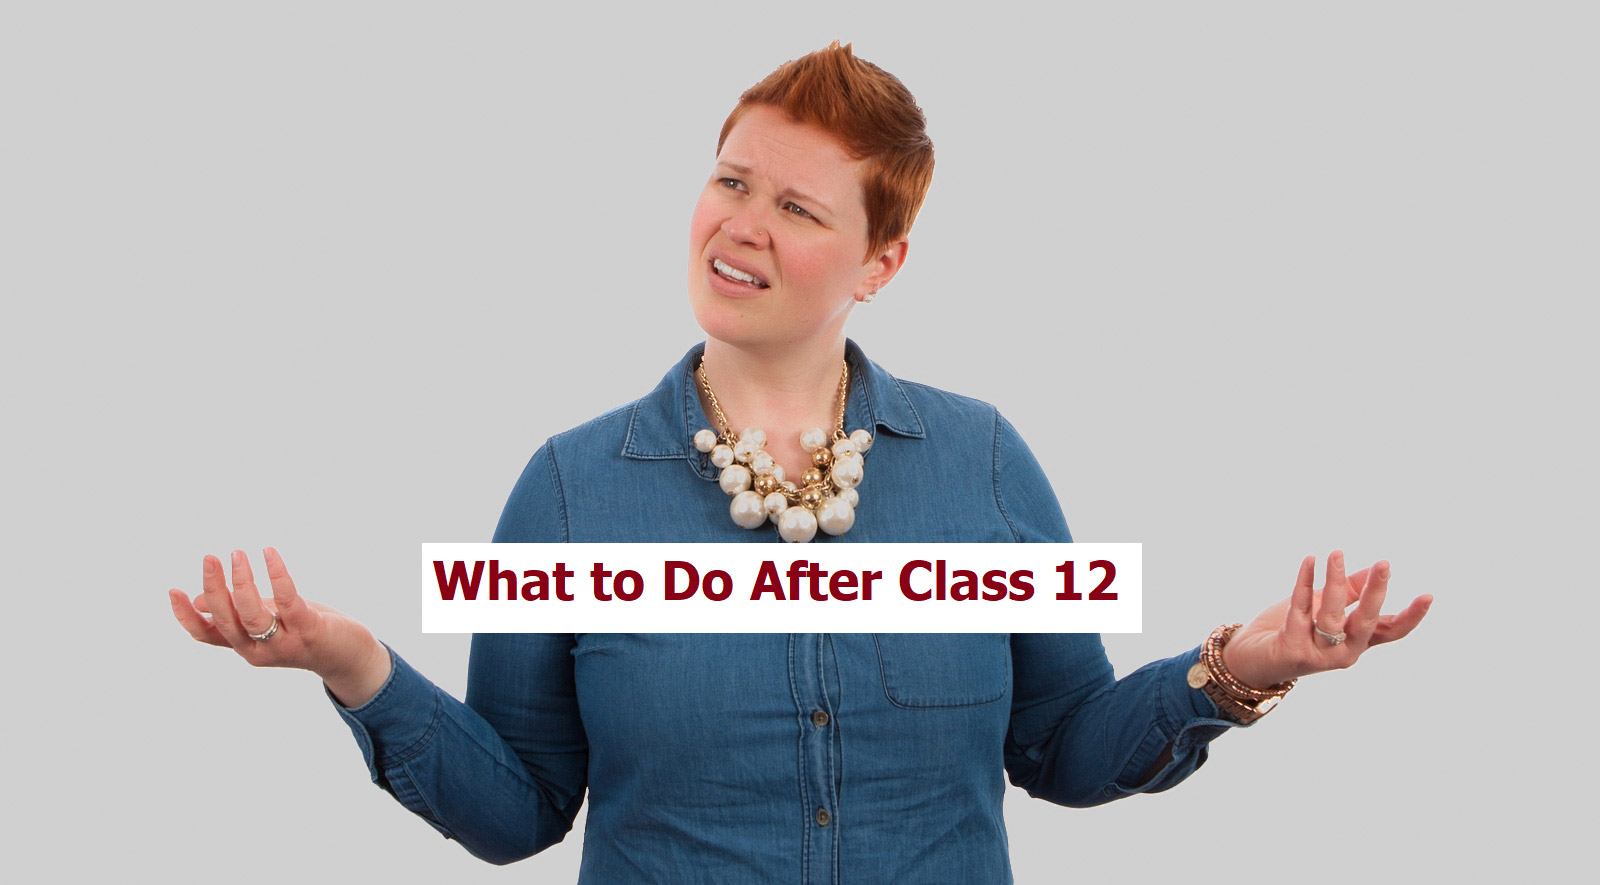 What to Do After Class 12